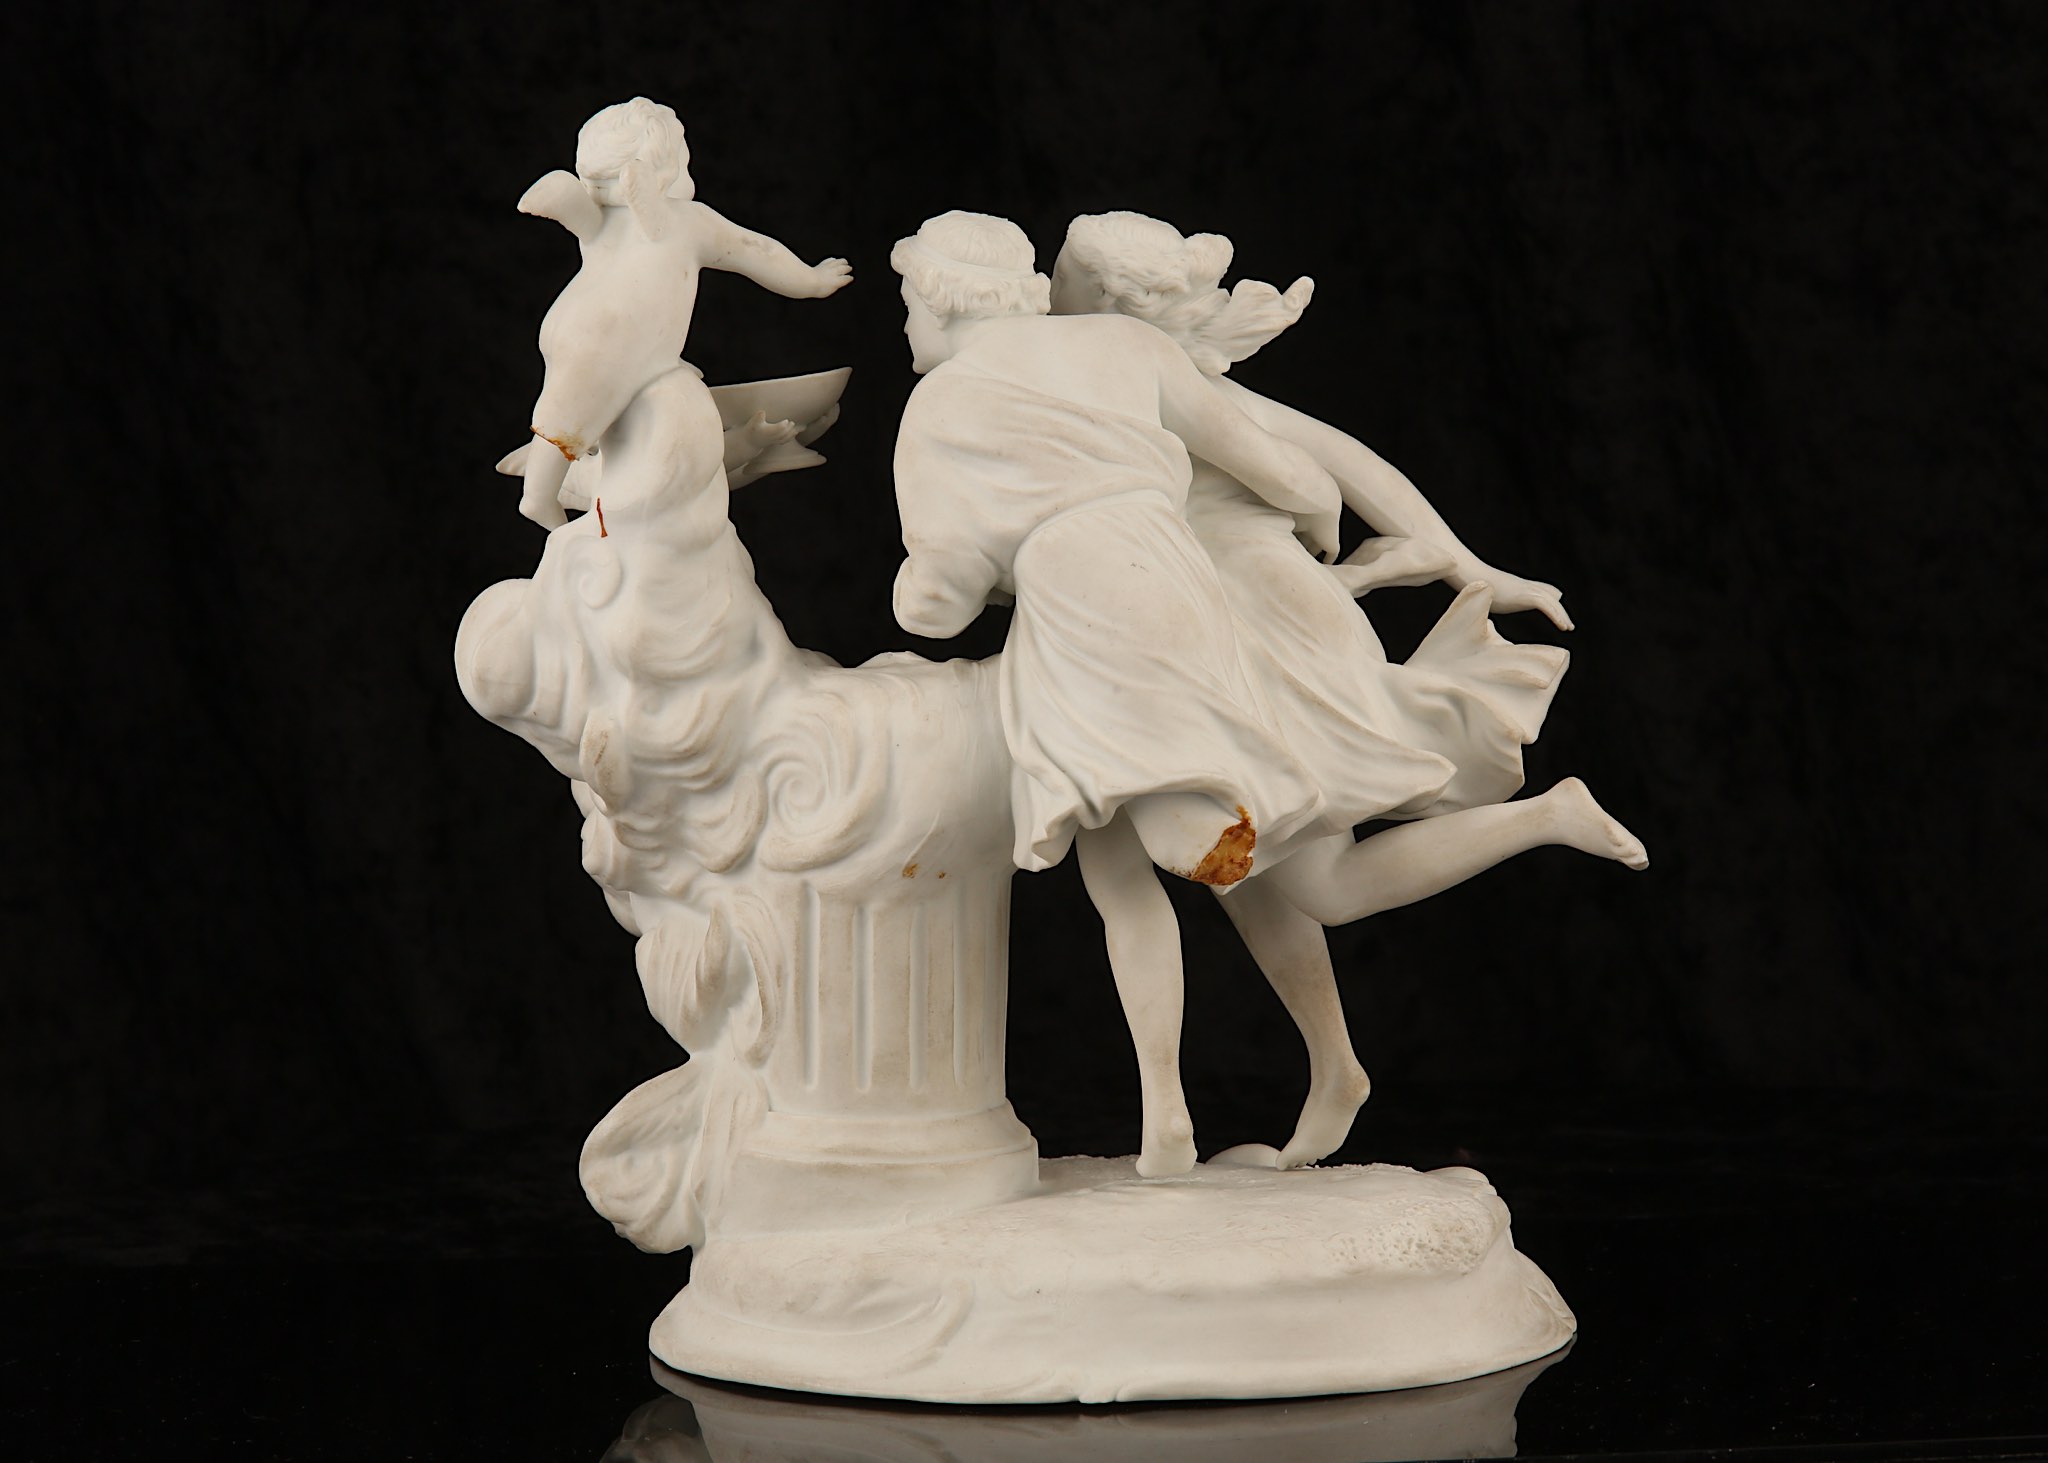 A SEVRES STYLE BISQUE PORCELAIN FIGURE GROUP OF 'THE FOUNTAIN OF LOVE', 19th century, after Jean- - Image 4 of 5